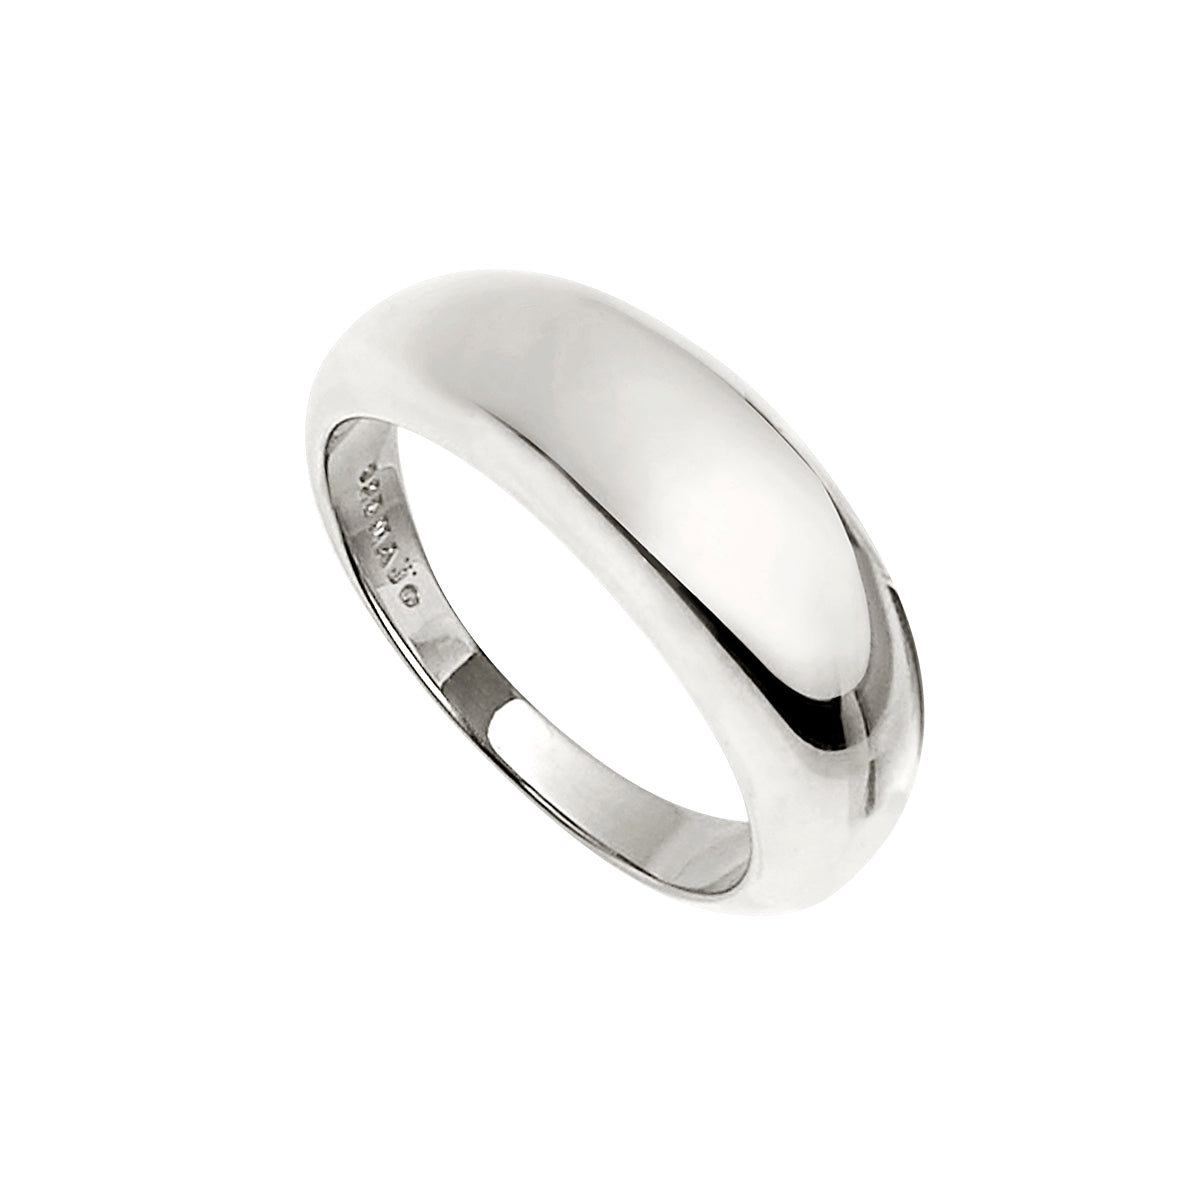 Najo Sublime Silver Ring R6507 Size P 1/2